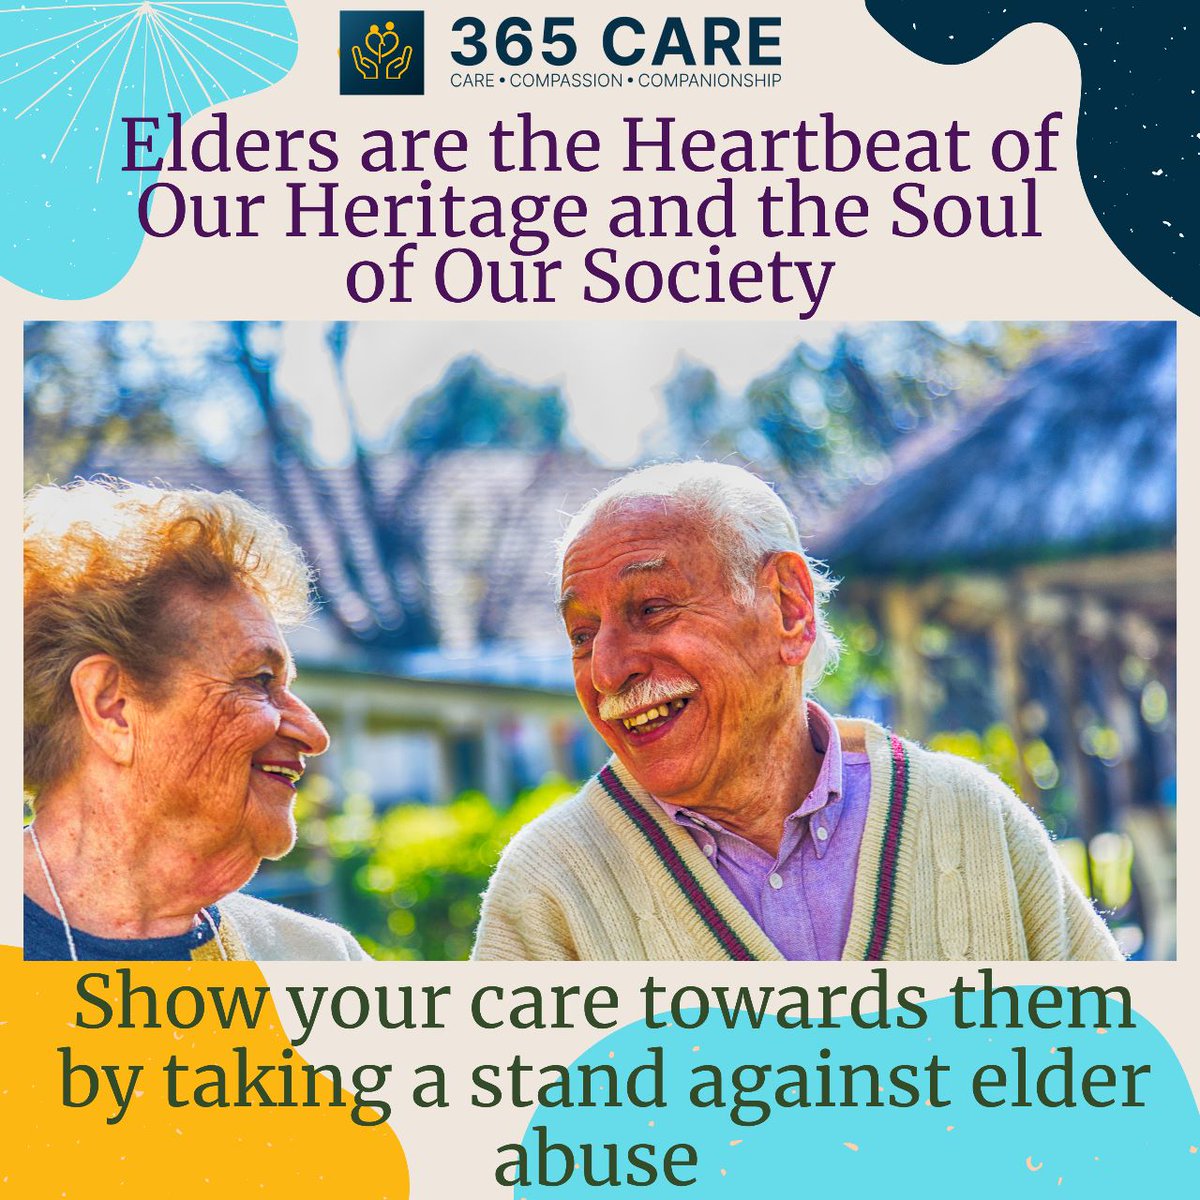 We stand united against elder abuse. Let's raise our voices, spread awareness, and protect our beloved elders. Together, we can create a world where they are cherished, respected, and safe. #NoElderAbuse #StandAgainstElderAbuse #WorldElderAbuseAwarenessDay